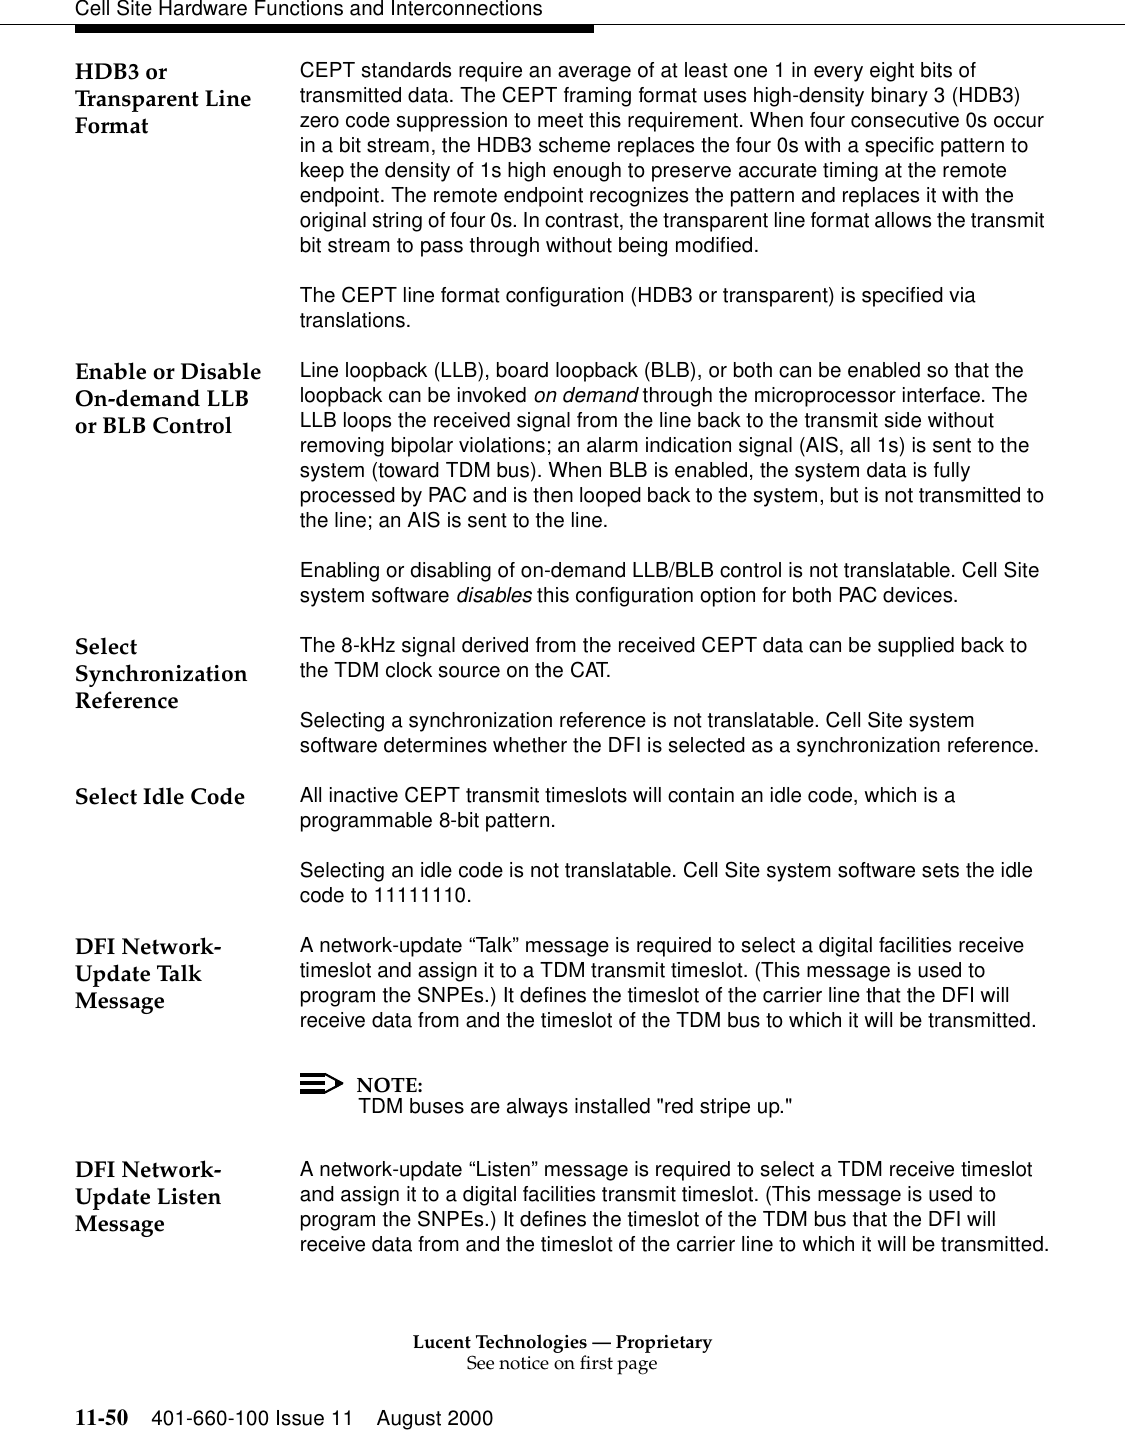 Lucent Technologies — ProprietarySee notice on first page11-50 401-660-100 Issue 11 August 2000Cell Site Hardware Functions and InterconnectionsHDB3 or Transparent Line FormatCEPT standards require an average of at least one 1 in every eight bits of transmitted data. The CEPT framing format uses high-density binary 3 (HDB3) zero code suppression to meet this requirement. When four consecutive 0s occur in a bit stream, the HDB3 scheme replaces the four 0s with a specific pattern to keep the density of 1s high enough to preserve accurate timing at the remote endpoint. The remote endpoint recognizes the pattern and replaces it with the original string of four 0s. In contrast, the transparent line format allows the transmit bit stream to pass through without being modified.The CEPT line format configuration (HDB3 or transparent) is specified via translations.Enable or Disable On-demand LLB or BLB ControlLine loopback (LLB), board loopback (BLB), or both can be enabled so that the loopback can be invoked on demand through the microprocessor interface. The LLB loops the received signal from the line back to the transmit side without removing bipolar violations; an alarm indication signal (AIS, all 1s) is sent to the system (toward TDM bus). When BLB is enabled, the system data is fully processed by PAC and is then looped back to the system, but is not transmitted to the line; an AIS is sent to the line.Enabling or disabling of on-demand LLB/BLB control is not translatable. Cell Site system software disables this configuration option for both PAC devices.Select Synchronization ReferenceThe 8-kHz signal derived from the received CEPT data can be supplied back to the TDM clock source on the CAT.Selecting a synchronization reference is not translatable. Cell Site system software determines whether the DFI is selected as a synchronization reference.Select Idle Code All inactive CEPT transmit timeslots will contain an idle code, which is a programmable 8-bit pattern.Selecting an idle code is not translatable. Cell Site system software sets the idle code to 11111110.DFI Network-Update Talk MessageA network-update “Tal k” message is required to select a digital facilities receive timeslot and assign it to a TDM transmit timeslot. (This message is used to program the SNPEs.) It defines the timeslot of the carrier line that the DFI will receive data from and the timeslot of the TDM bus to which it will be transmitted.NOTE:TDM buses are always installed &quot;red stripe up.&quot;DFI Network-Update Listen MessageA network-update “Listen” message is required to select a TDM receive timeslot and assign it to a digital facilities transmit timeslot. (This message is used to program the SNPEs.) It defines the timeslot of the TDM bus that the DFI will receive data from and the timeslot of the carrier line to which it will be transmitted.